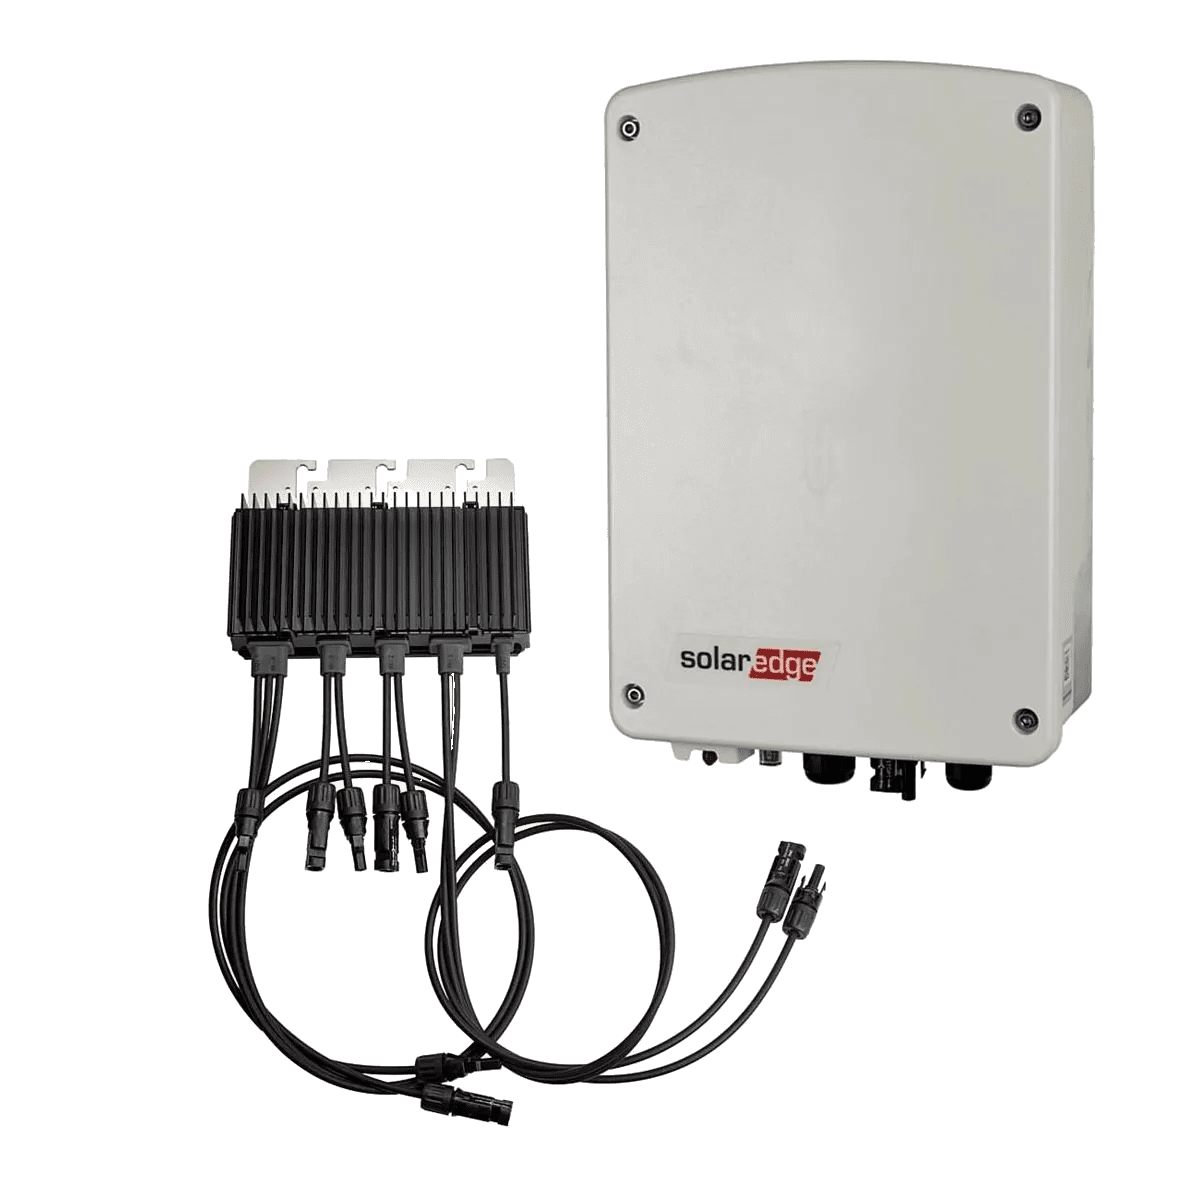 SolarEdge 1PH, 1.5kW inverter with compact design, extended communication and M2640 power optimizer